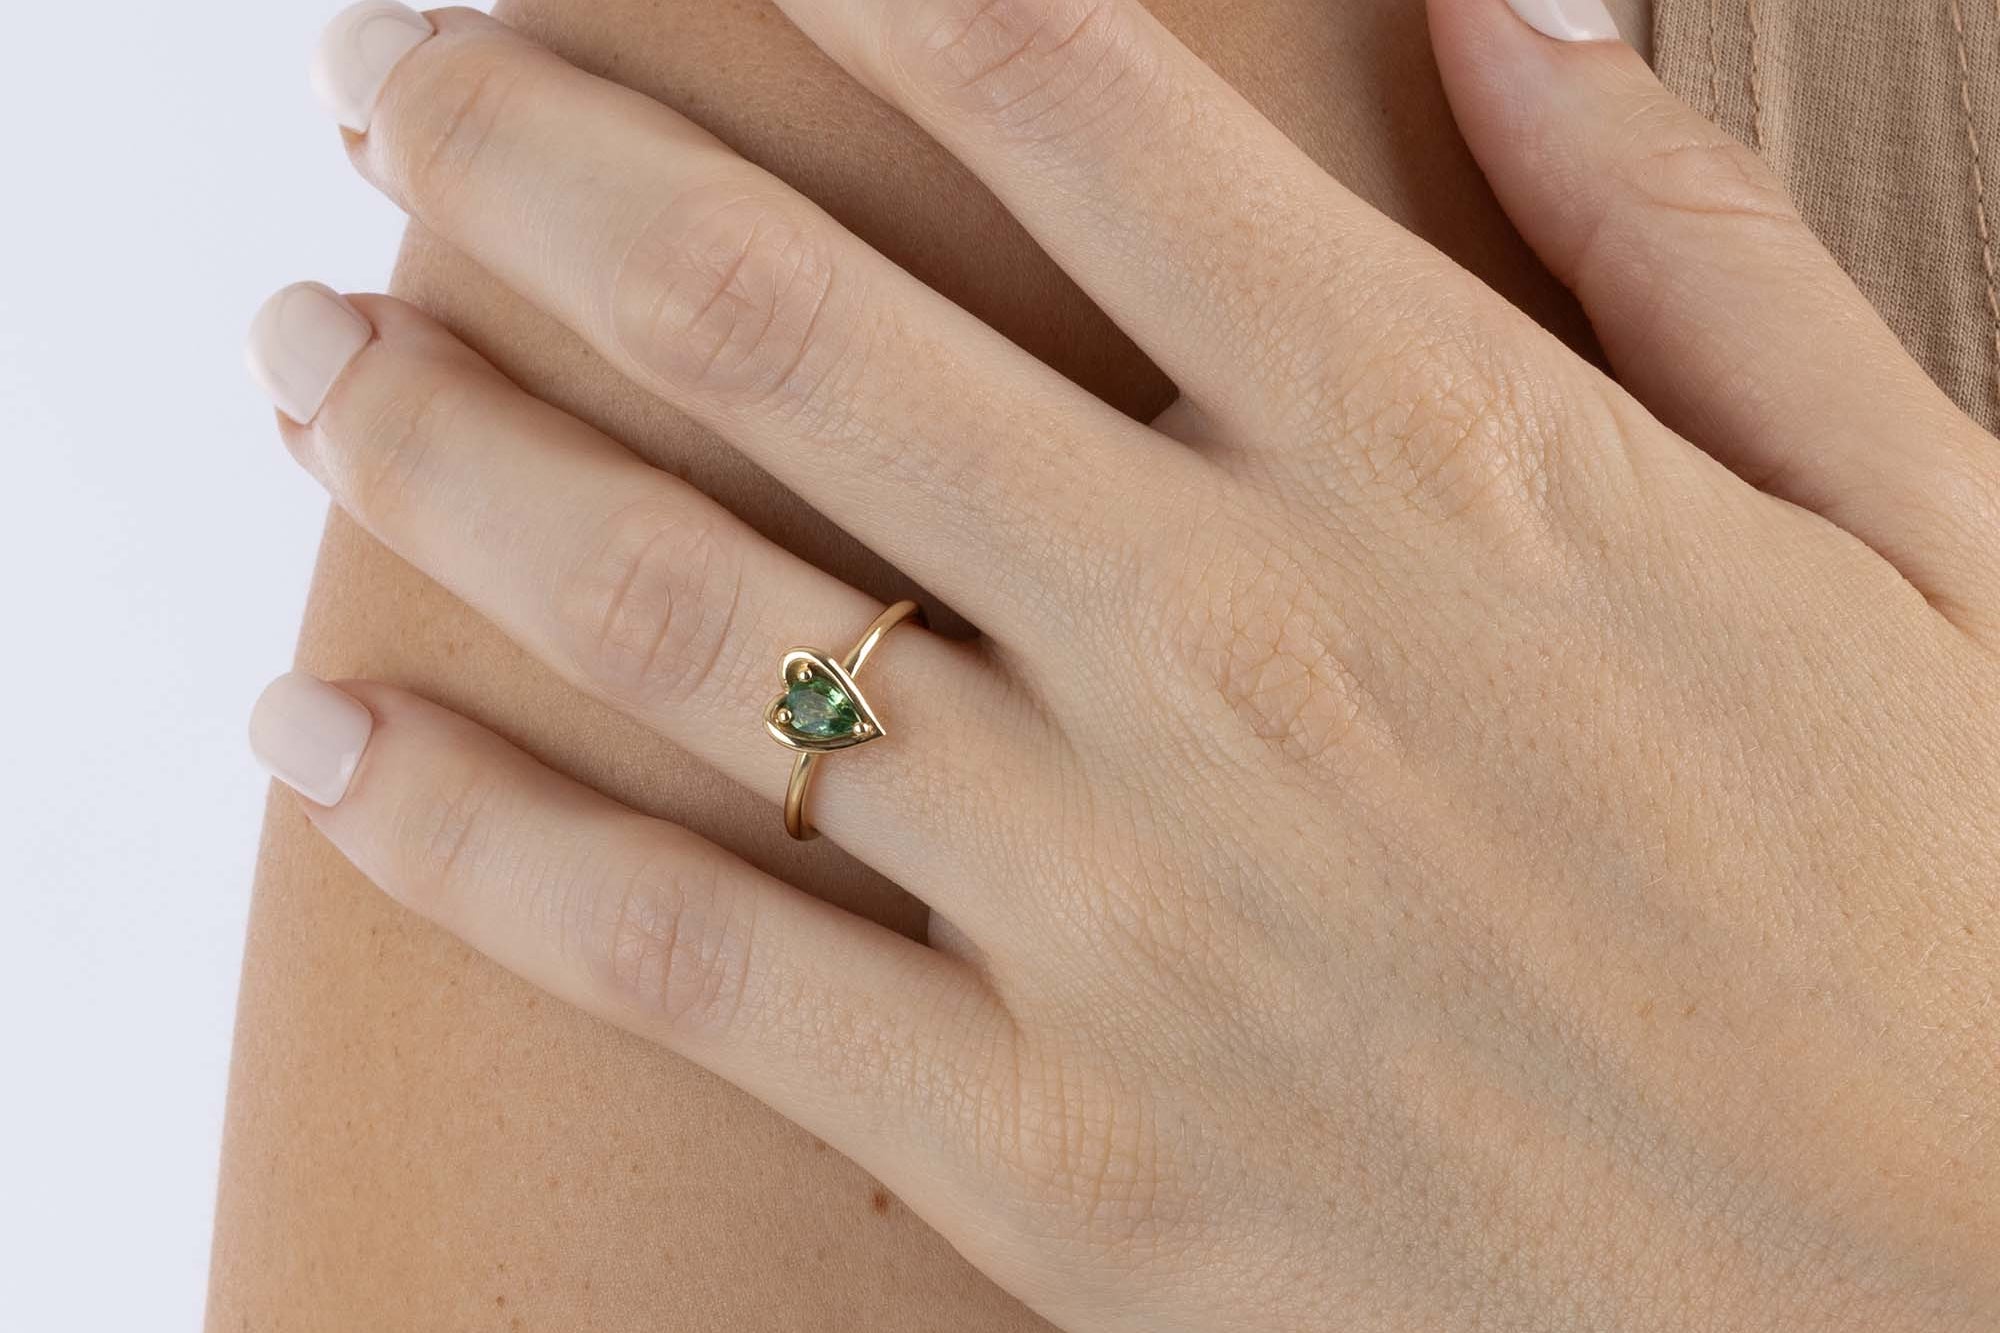 Yellow Gold heart shaped ring with a pear shaped Green Sapphire, Small - Model shot